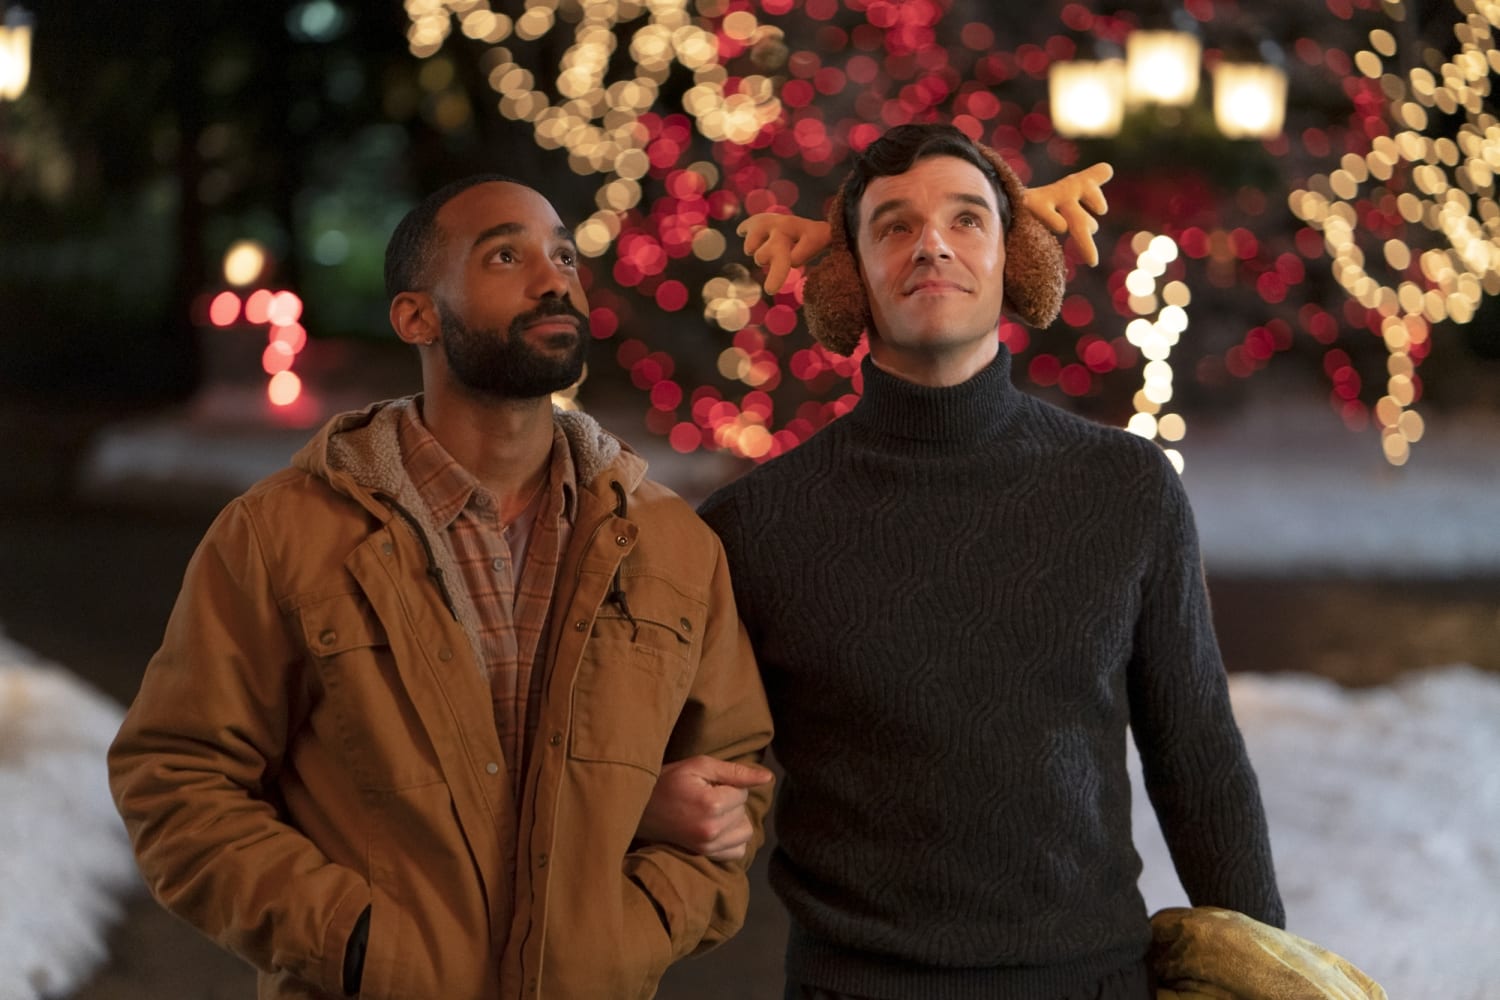 Make The Yuletide Gay With These New Lgbtq Christmas Movies